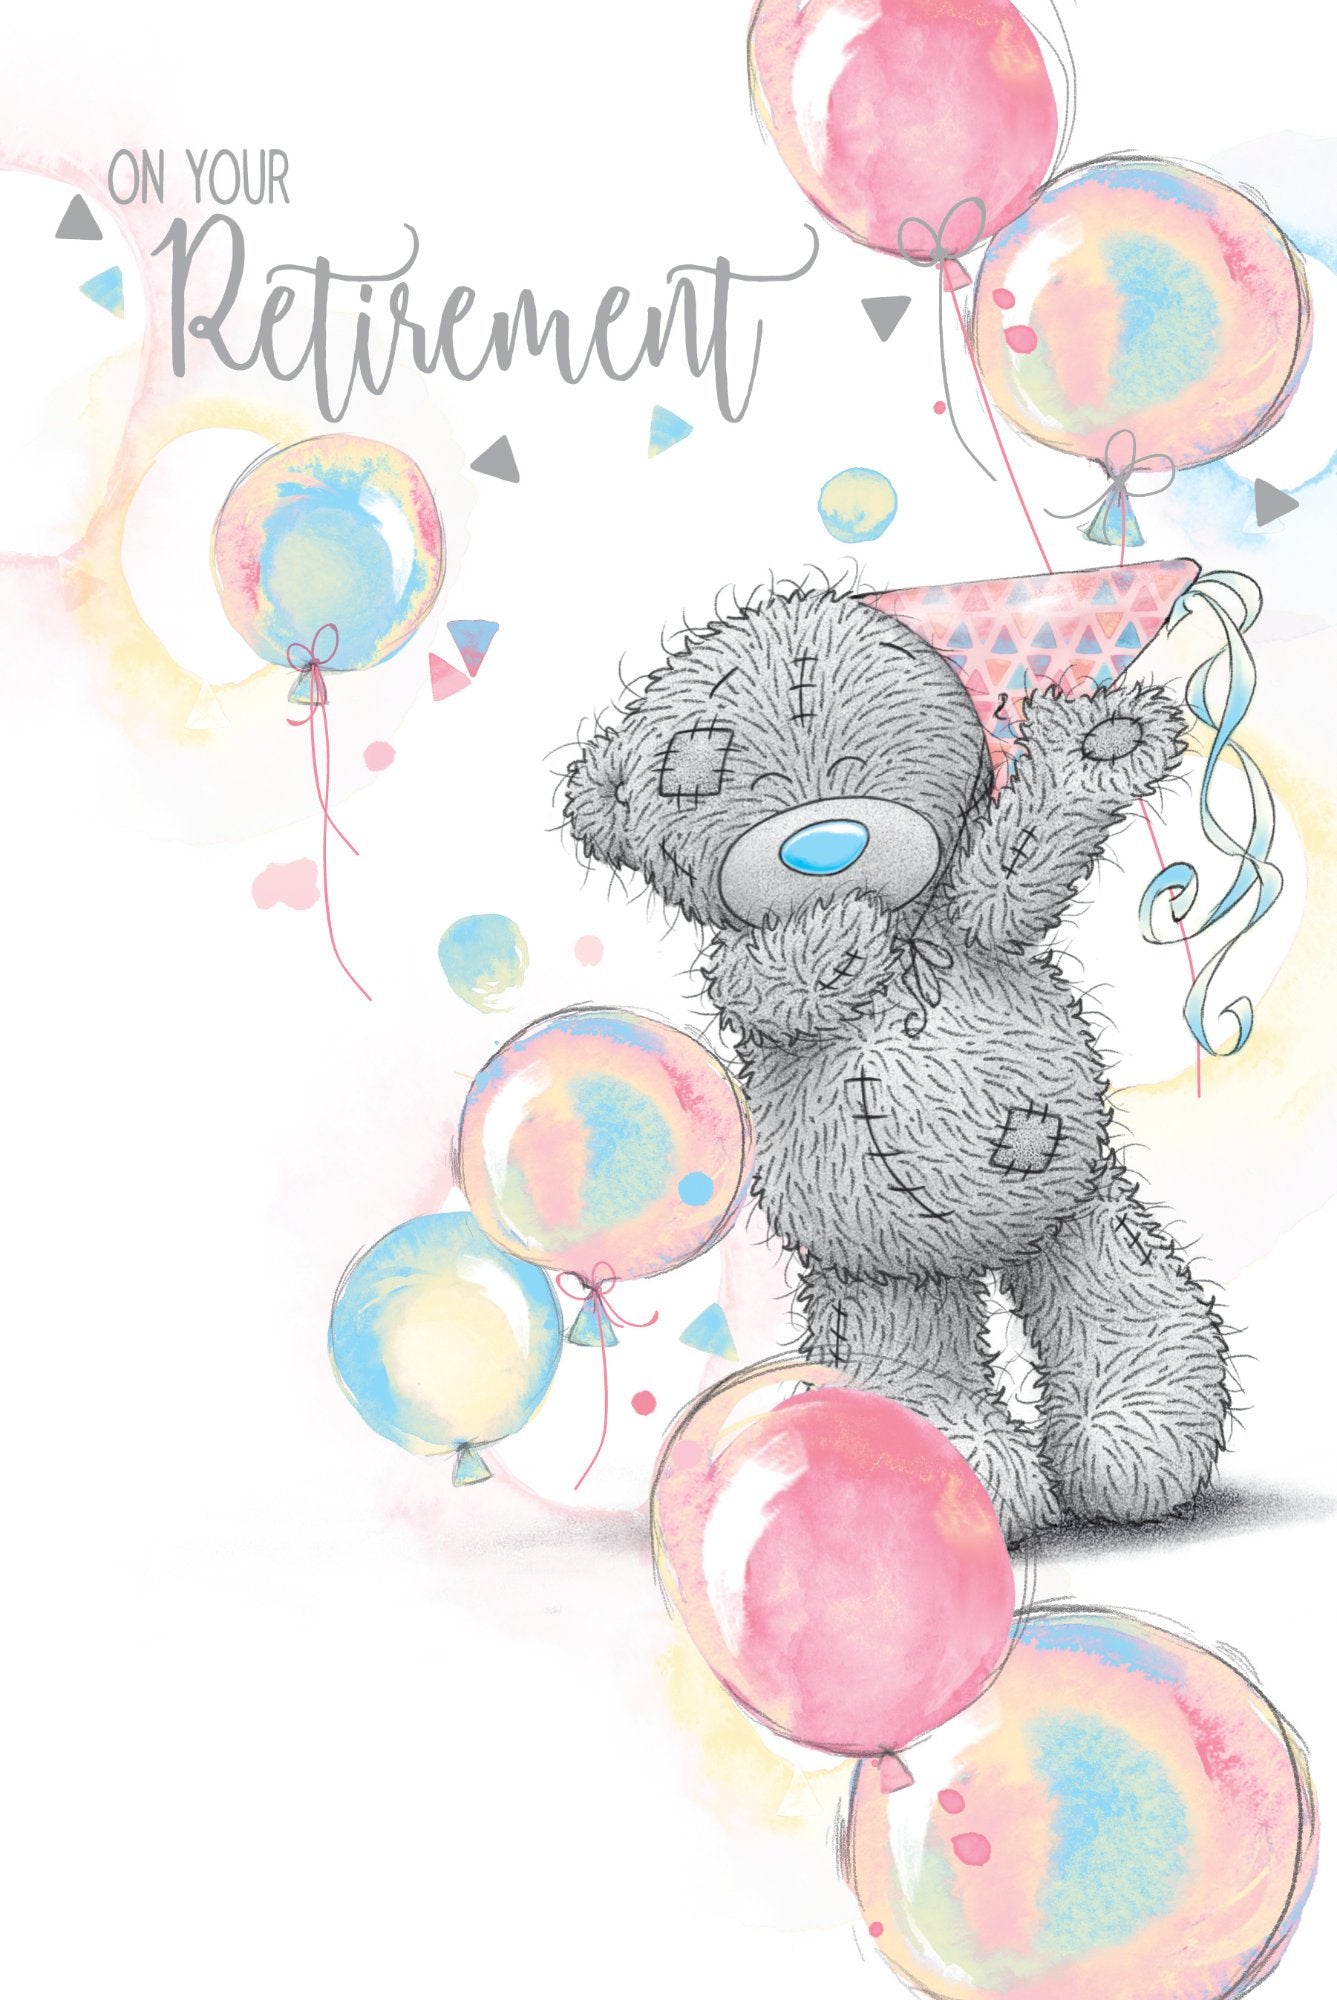 Photograph of Retirement Teddy with Balloons Greetings Card at Nicole's Shop